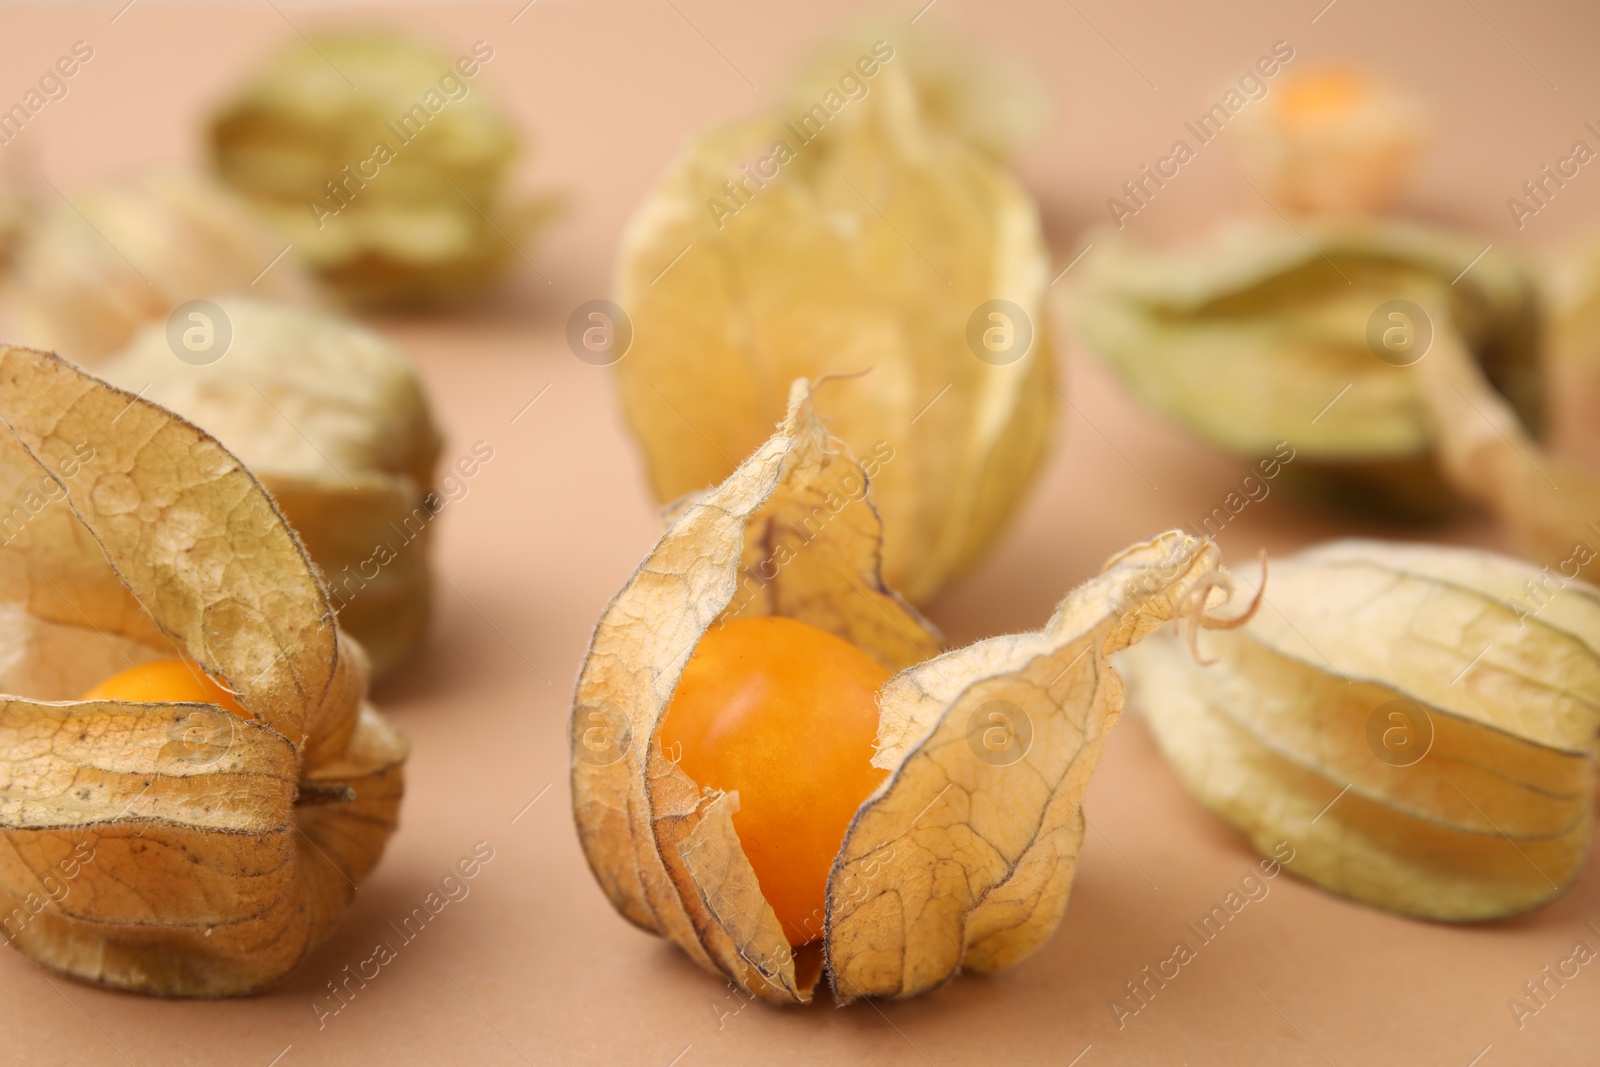 Photo of Ripe physalis fruits with calyxes on beige background, closeup